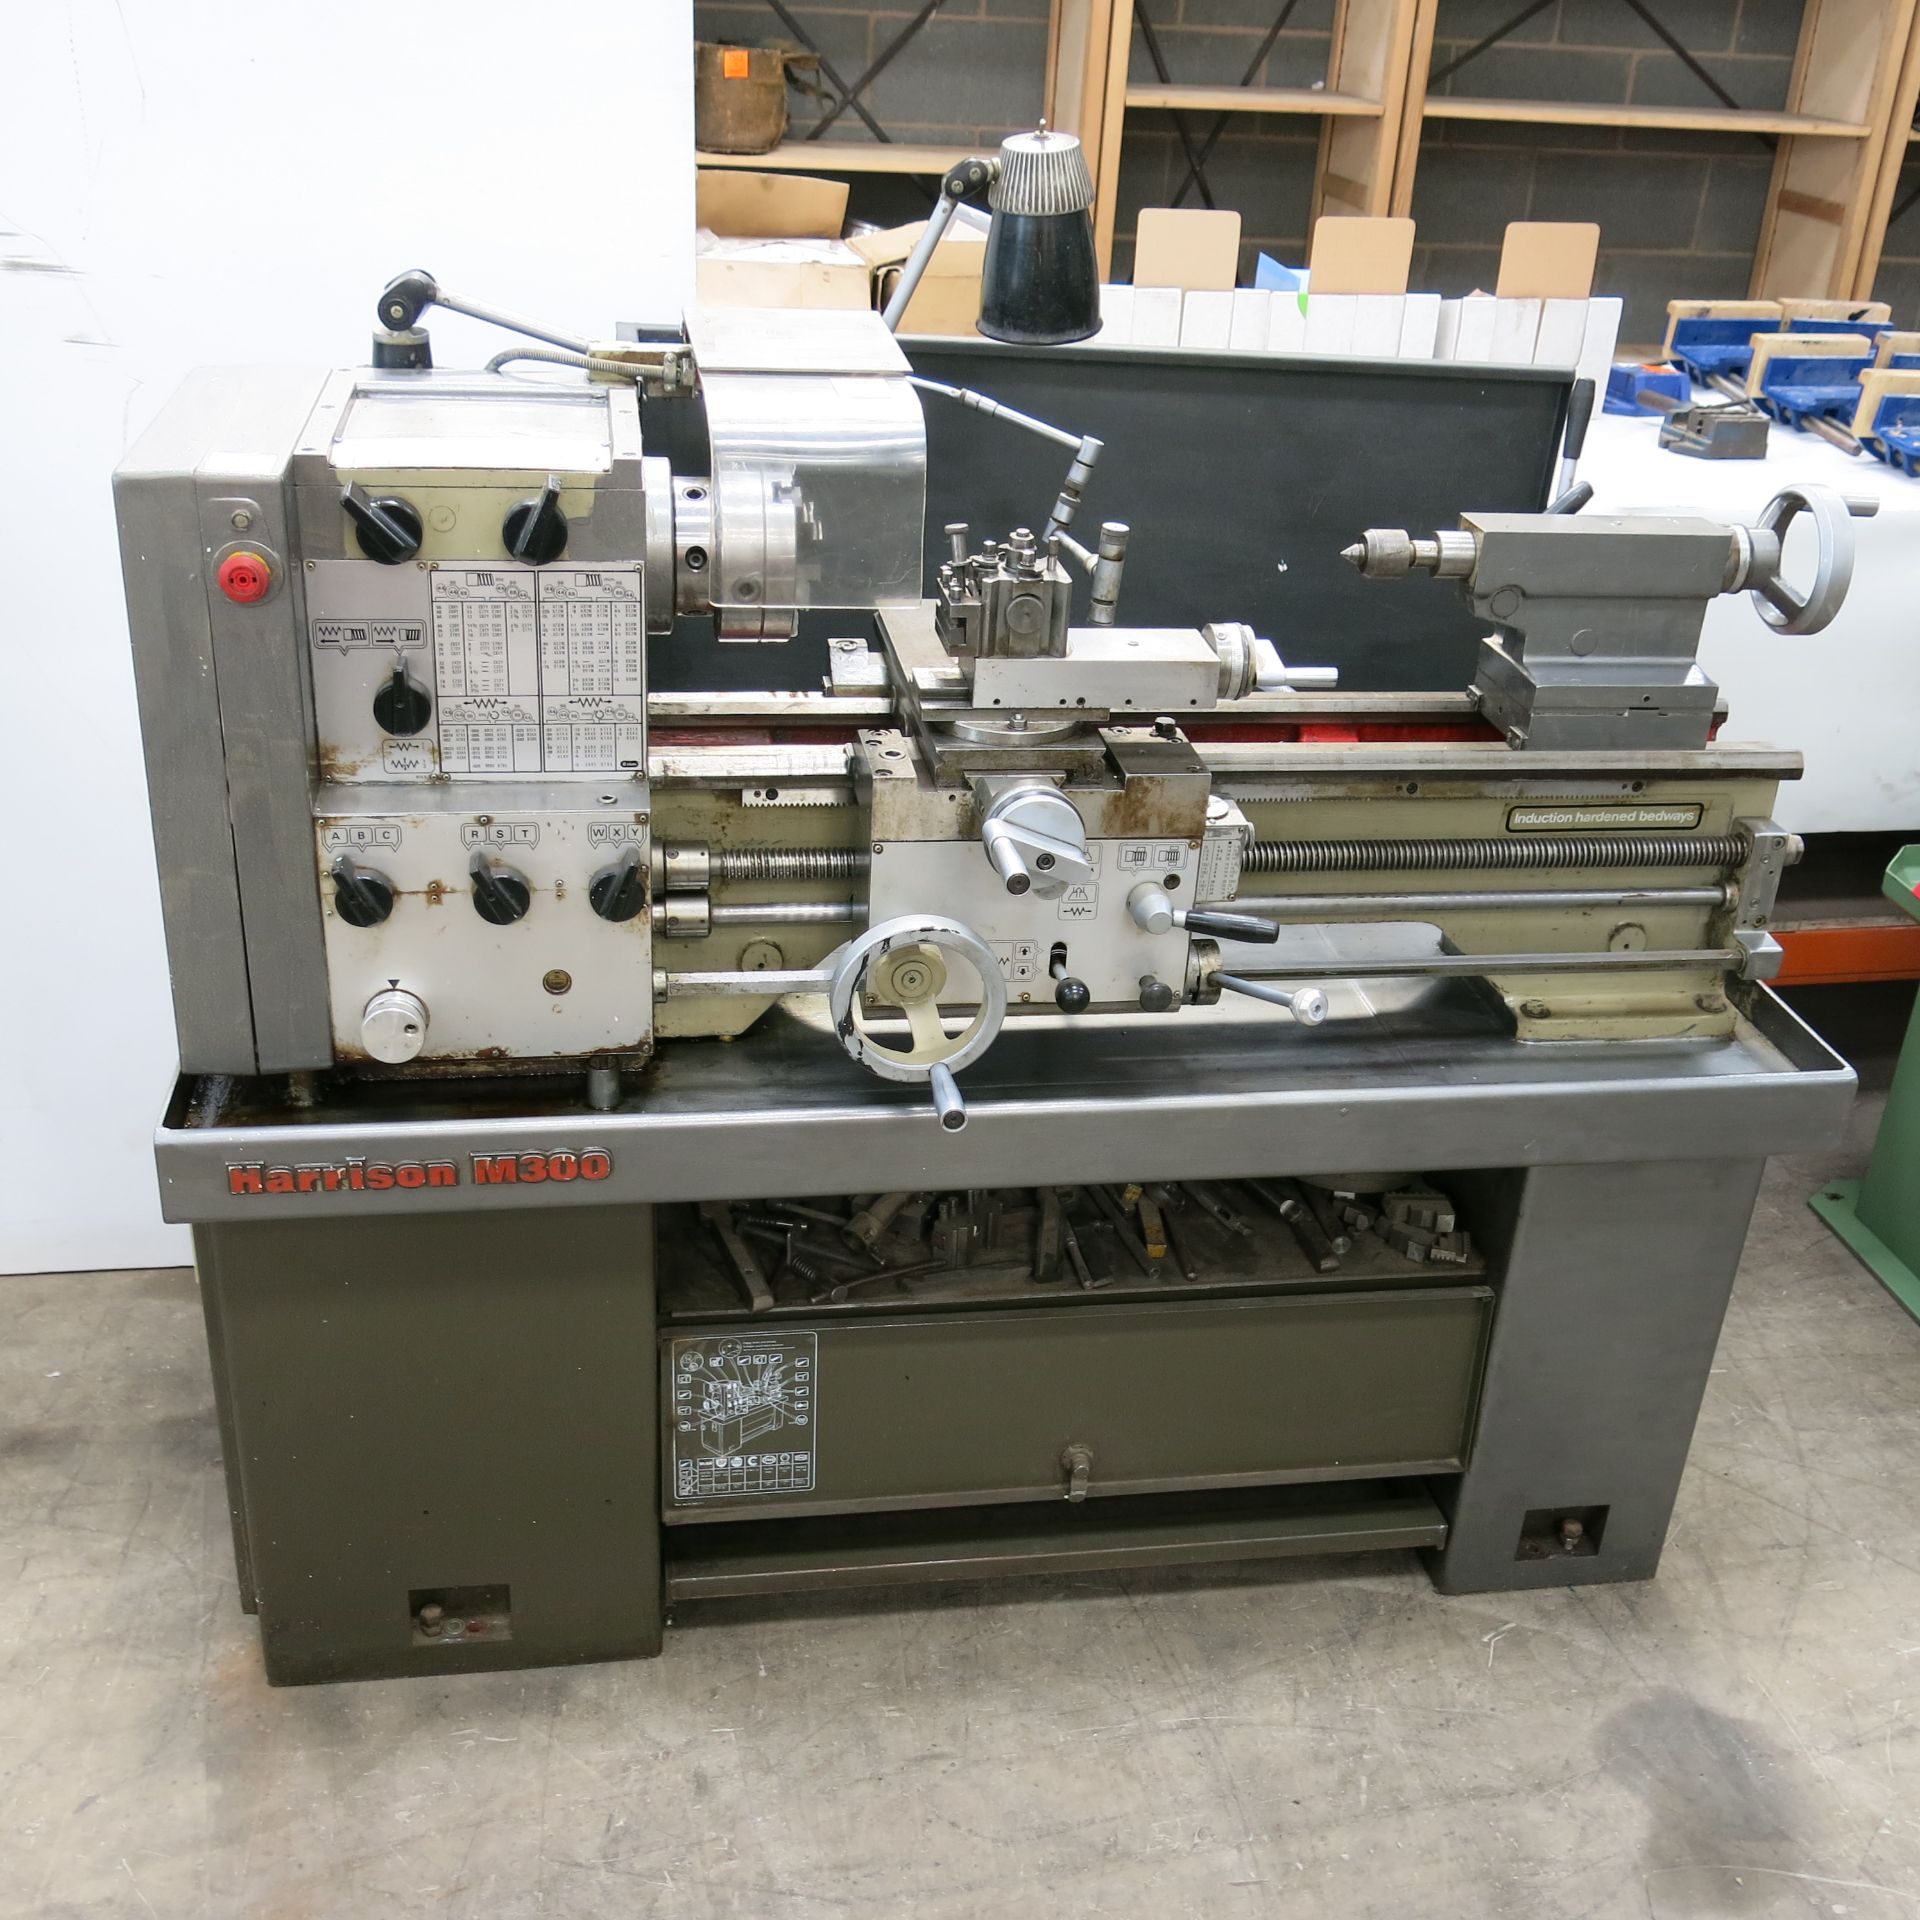 * A Harrison M300 Lathe, 3 Phase, SN EWD 302. Please note, there is a £5 plus vat handling fee on